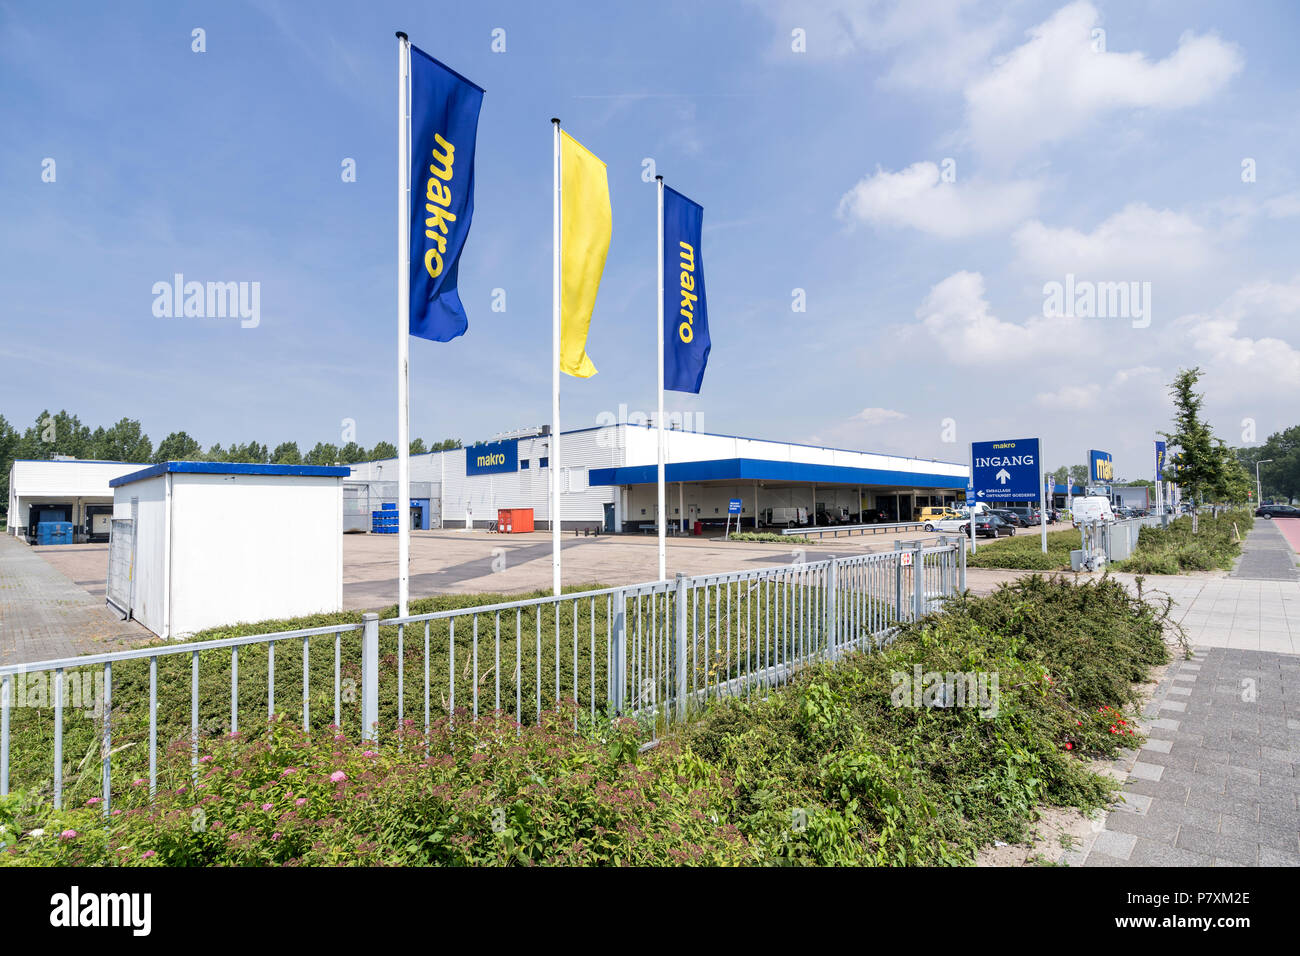 Makro cash & carry market in Beverwijk, the Netherlands. Makro is an international brand of Warehouse clubs, also called cash and carries. Stock Photo